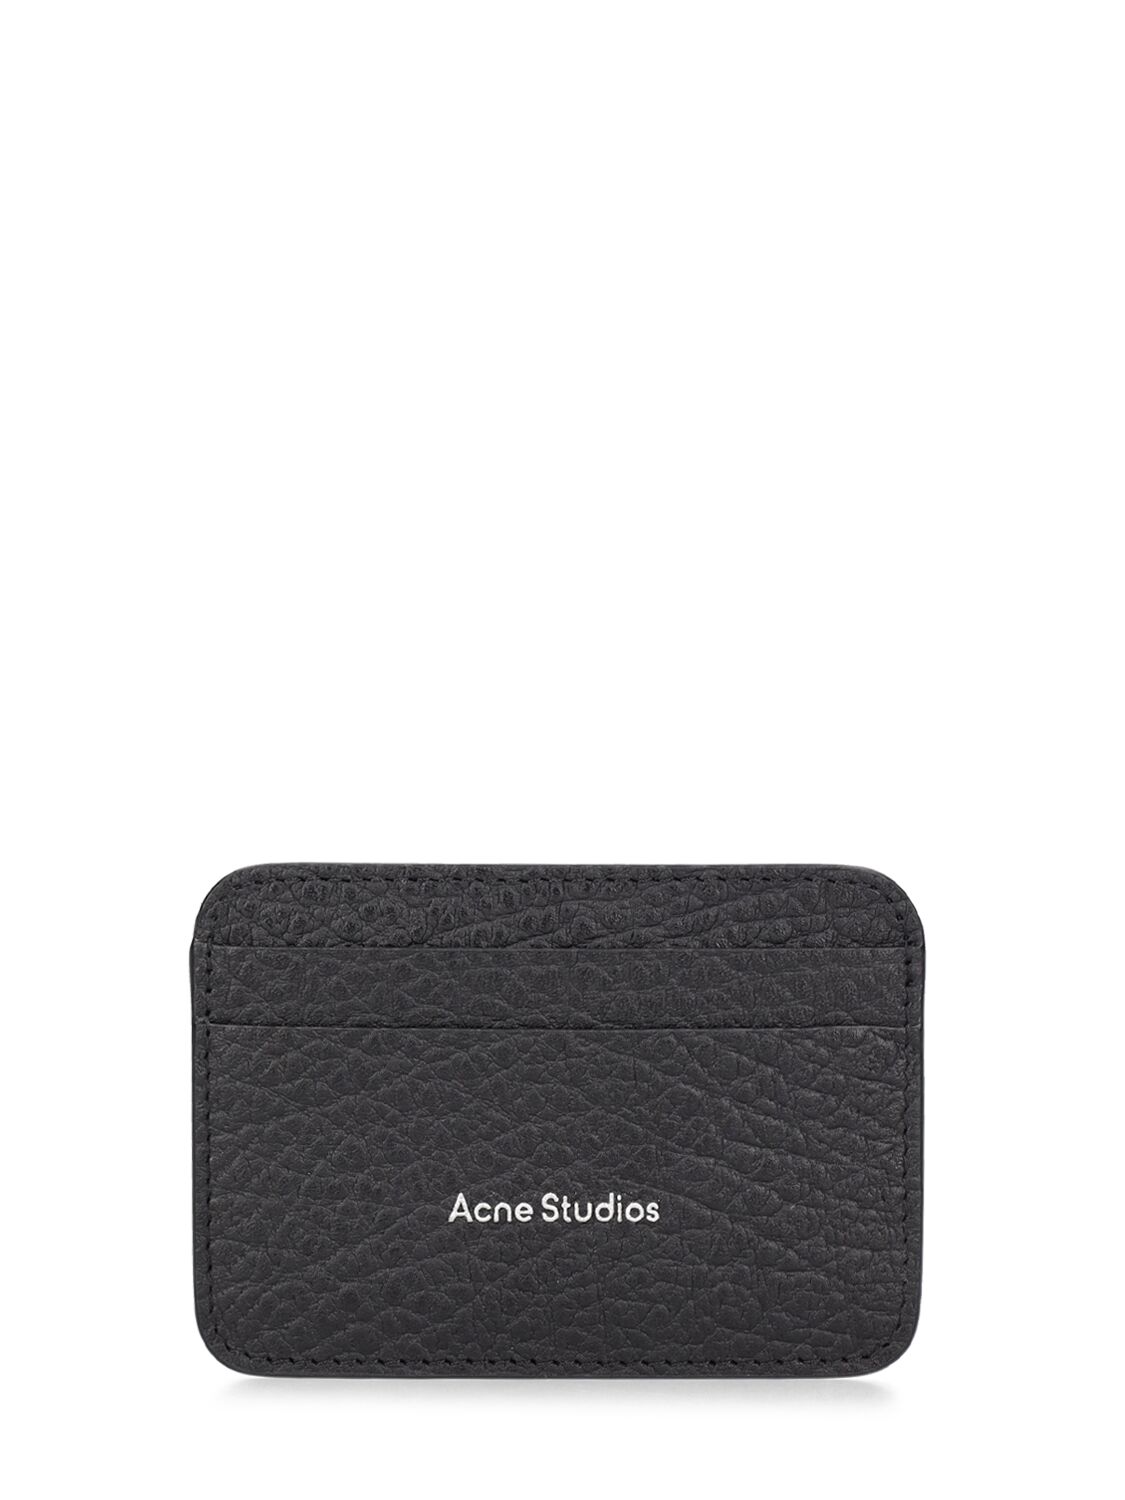 Aroundy Leather Card Holder